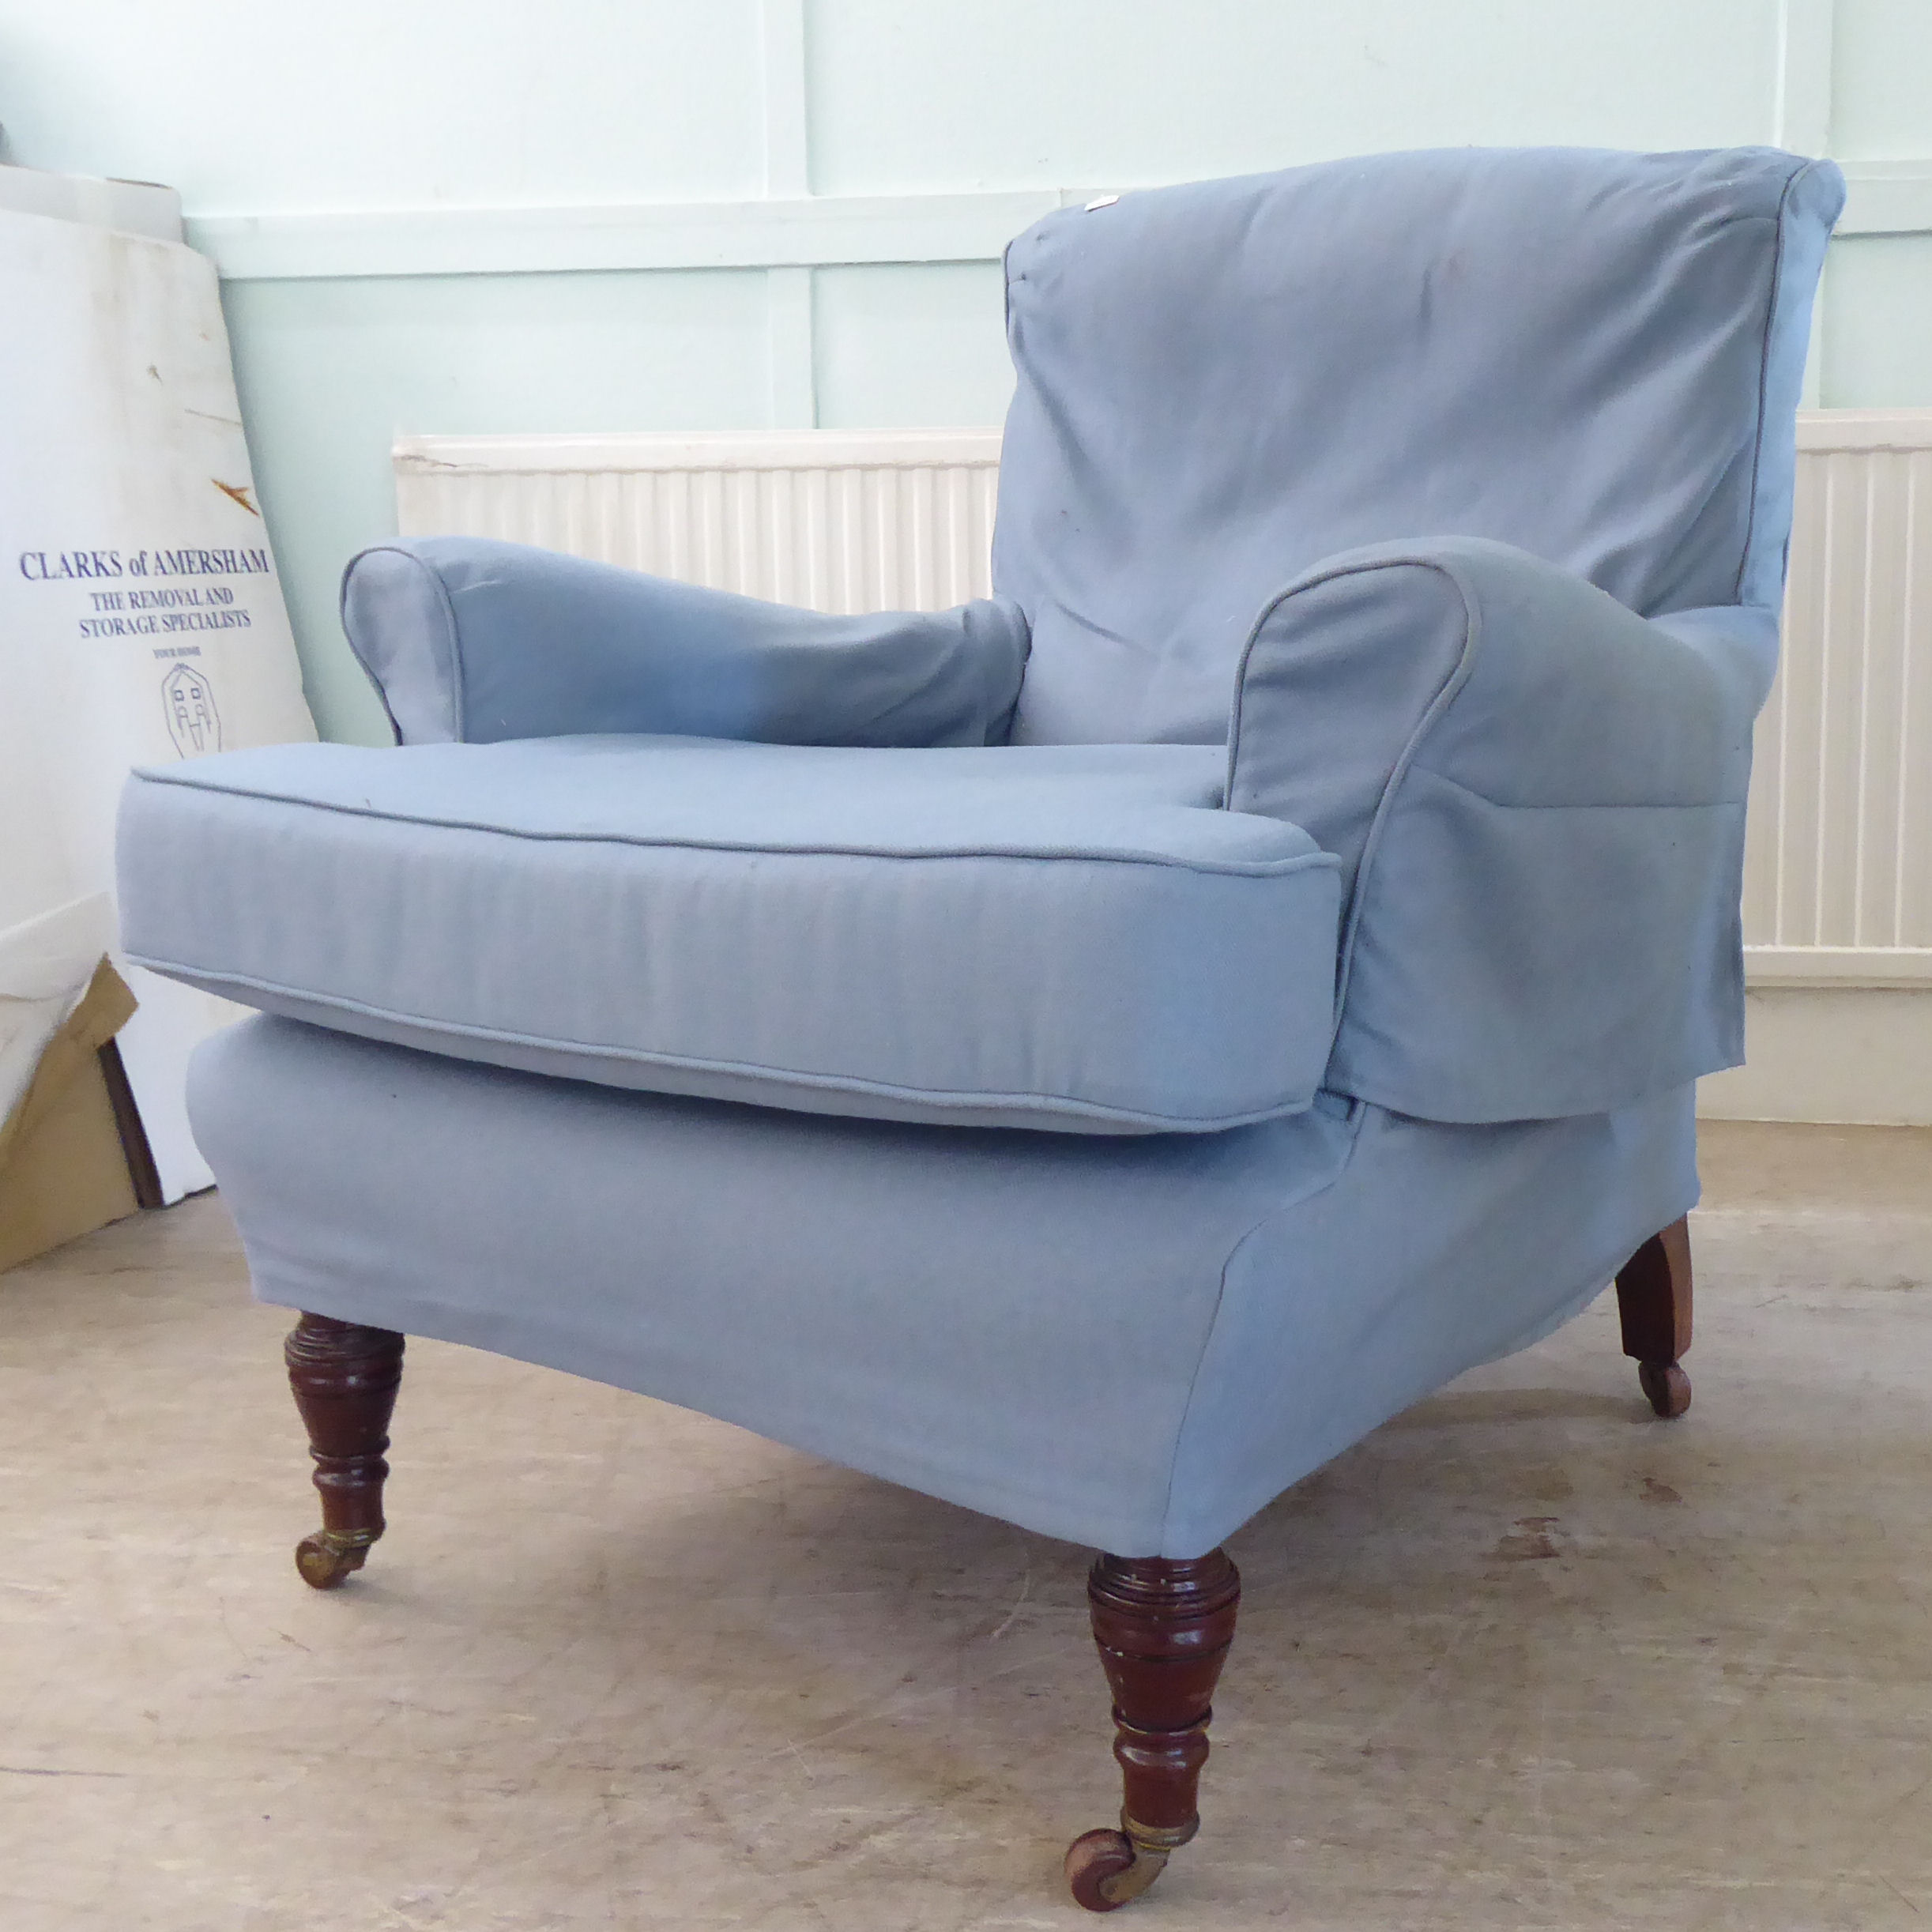 A late Victorian library chair with a level back and enclosed arms, re-upholstered in patterned blue